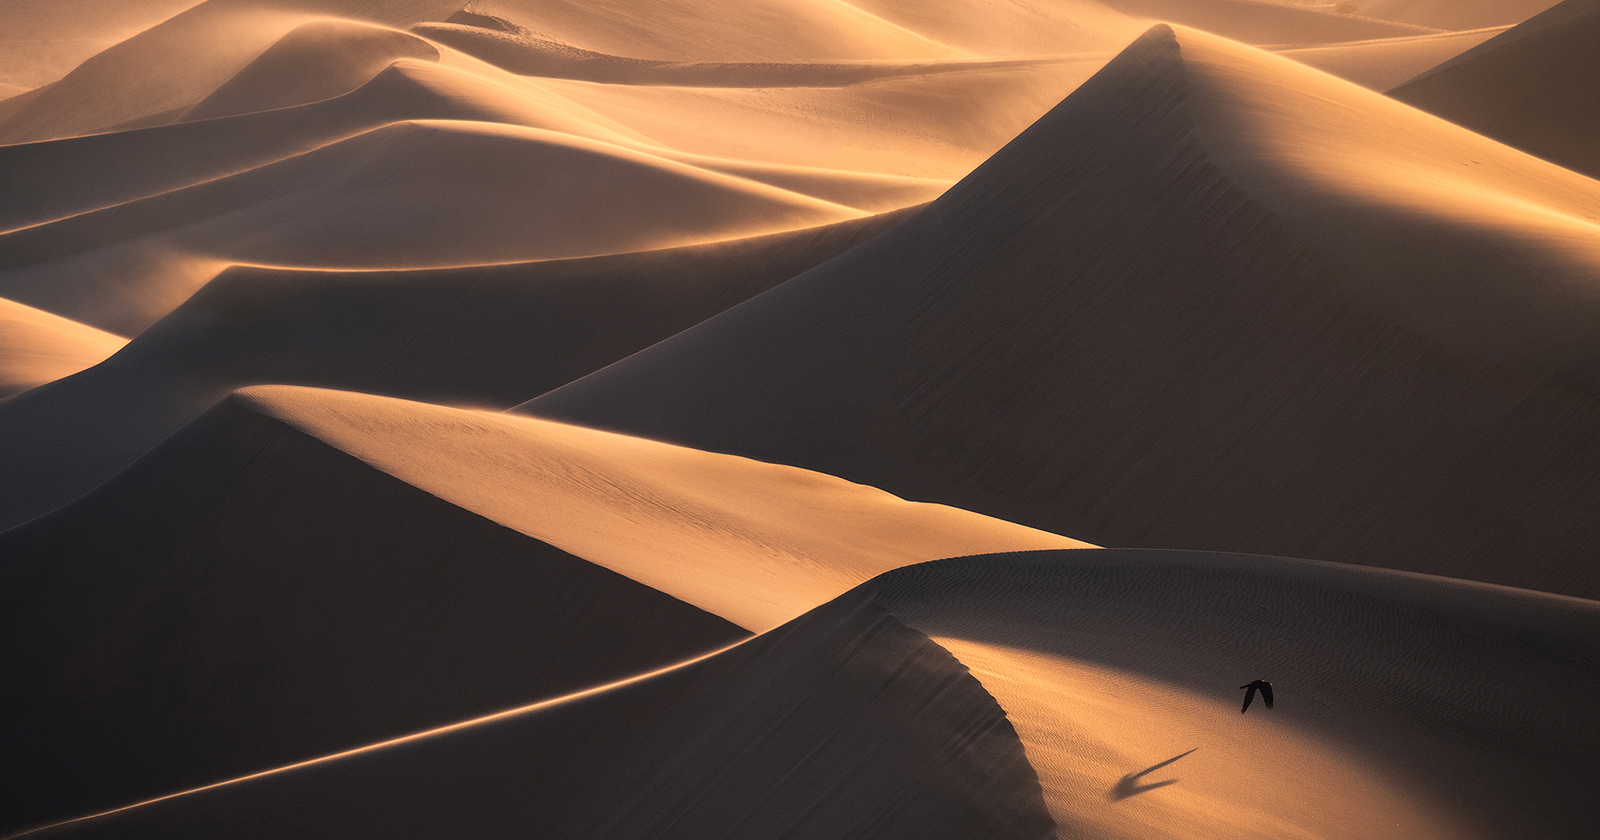 How to Capture the Unique Details of Sand Dunes with a Telephoto